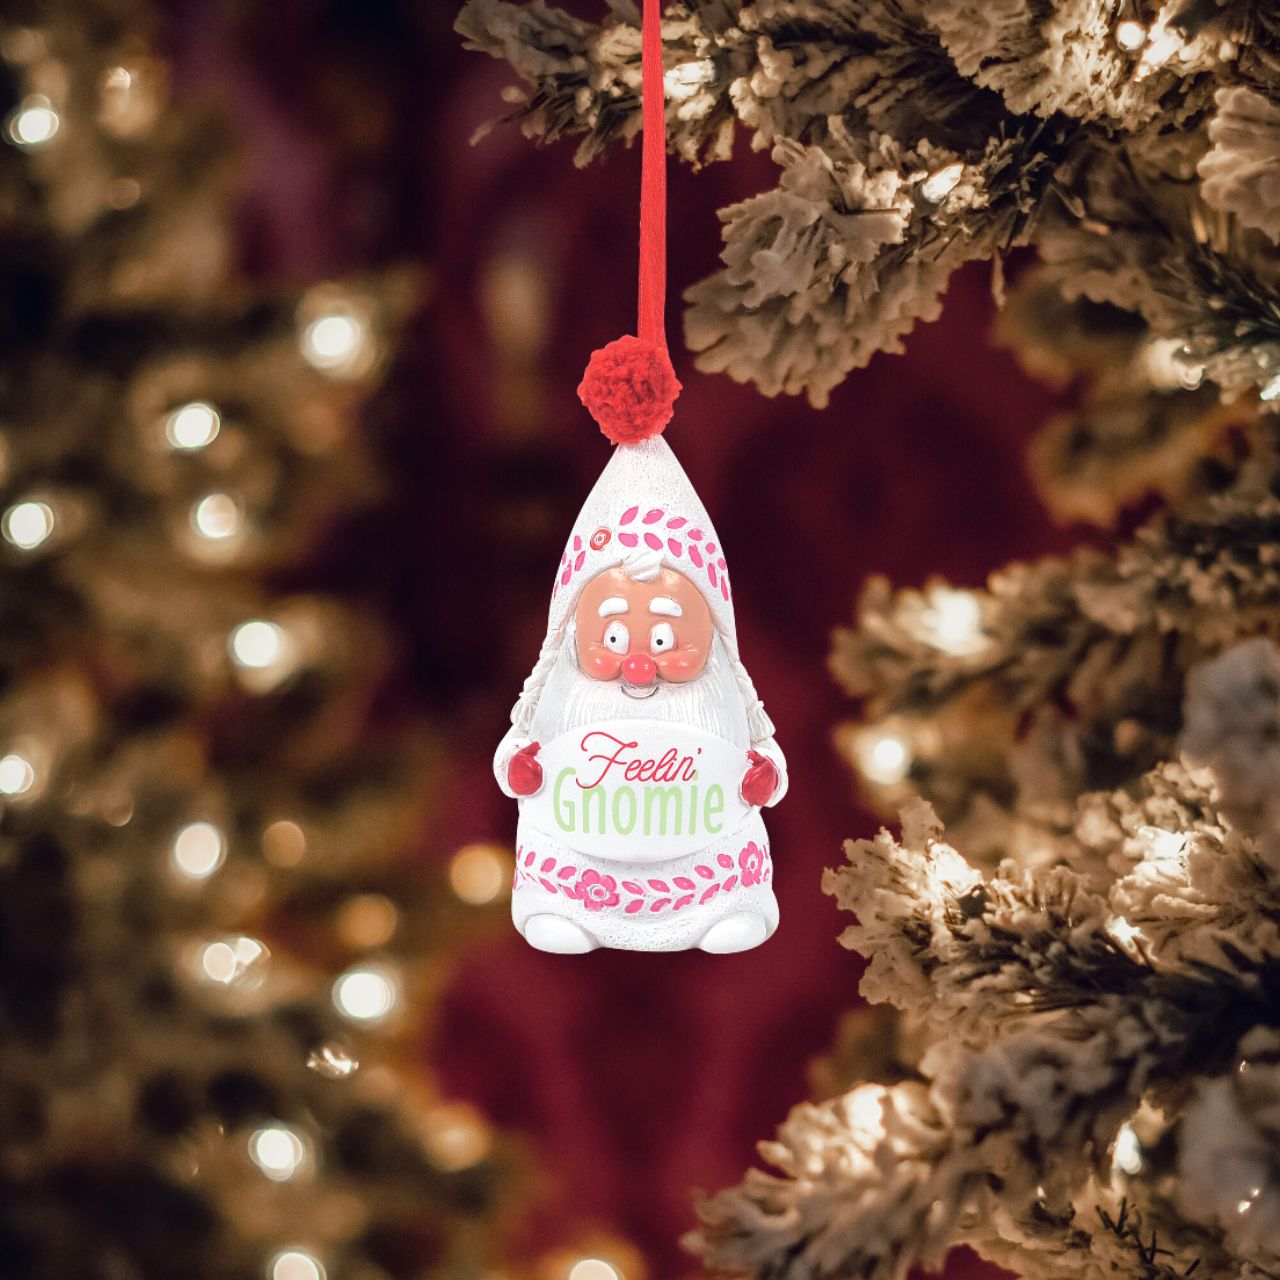 Department 56 Snowpinions Snow Gnome Feelin' Gnomie Hanging Ornament  This happy little Snow Gnome is the perfect Christmas tree accessory. Crafted from high quality cast stone before being hand painted and topped with a real pom pom. The perfect gift for loved ones or yourself this festive season.